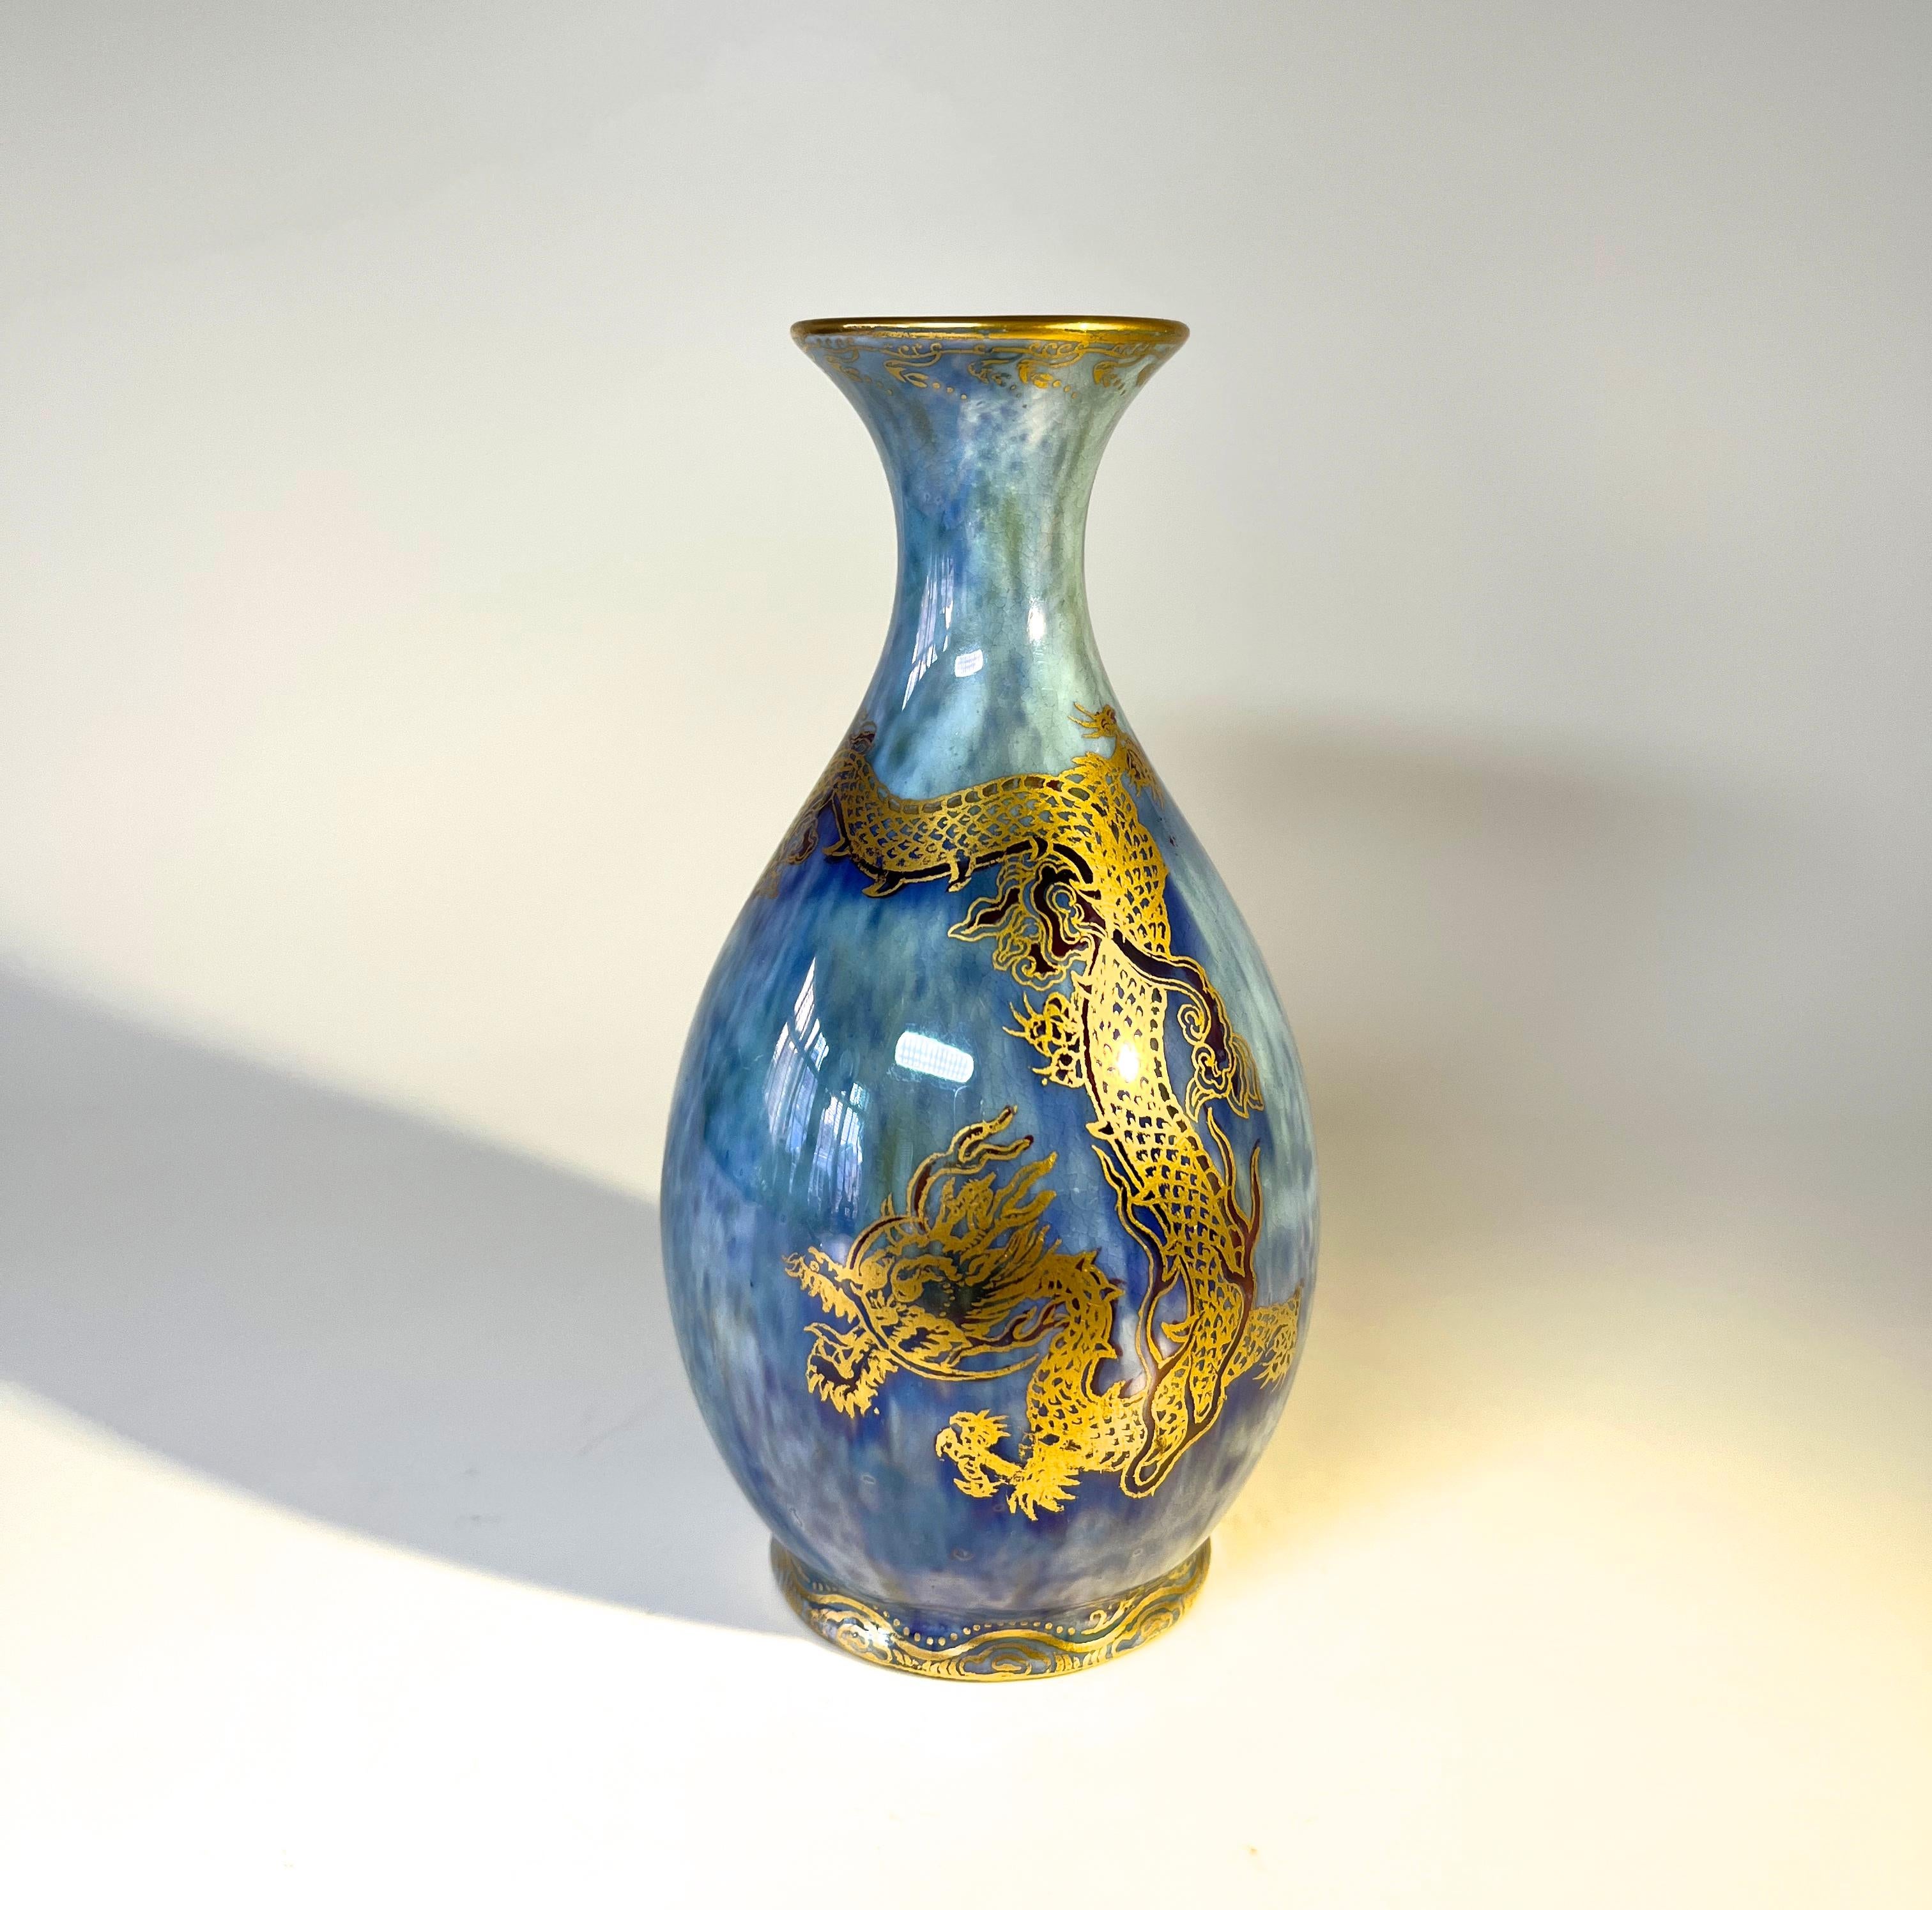 Superb Wedgwood Ordinary lustre bud vase by Daisy Makes-Jones.
Dominated by a dramatic gilded crested dragon on a mottled cerulean blue background. 
Gilded filigree surround both upper and lower rims
The interior is a delicate cream pearl lustre